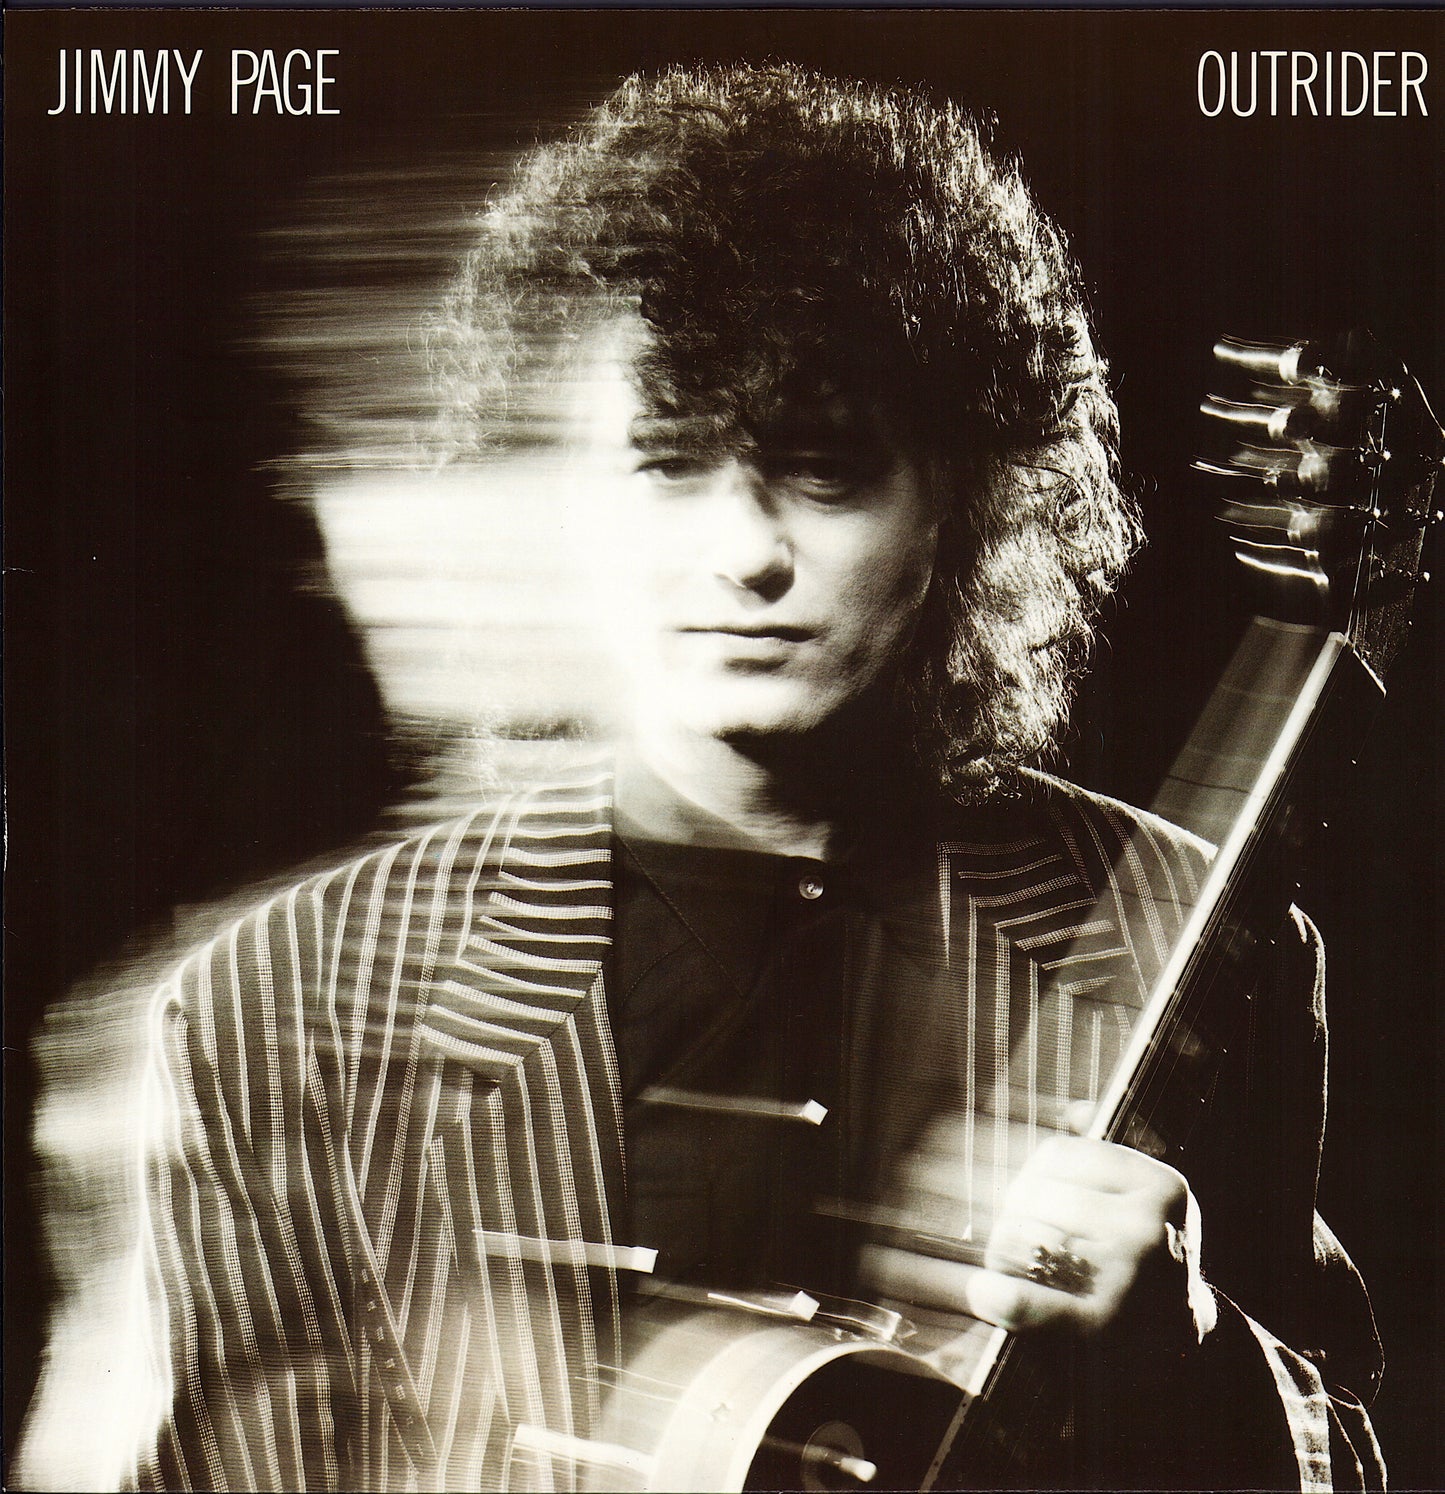 Jimmy Page - Outrider Vinyl LP